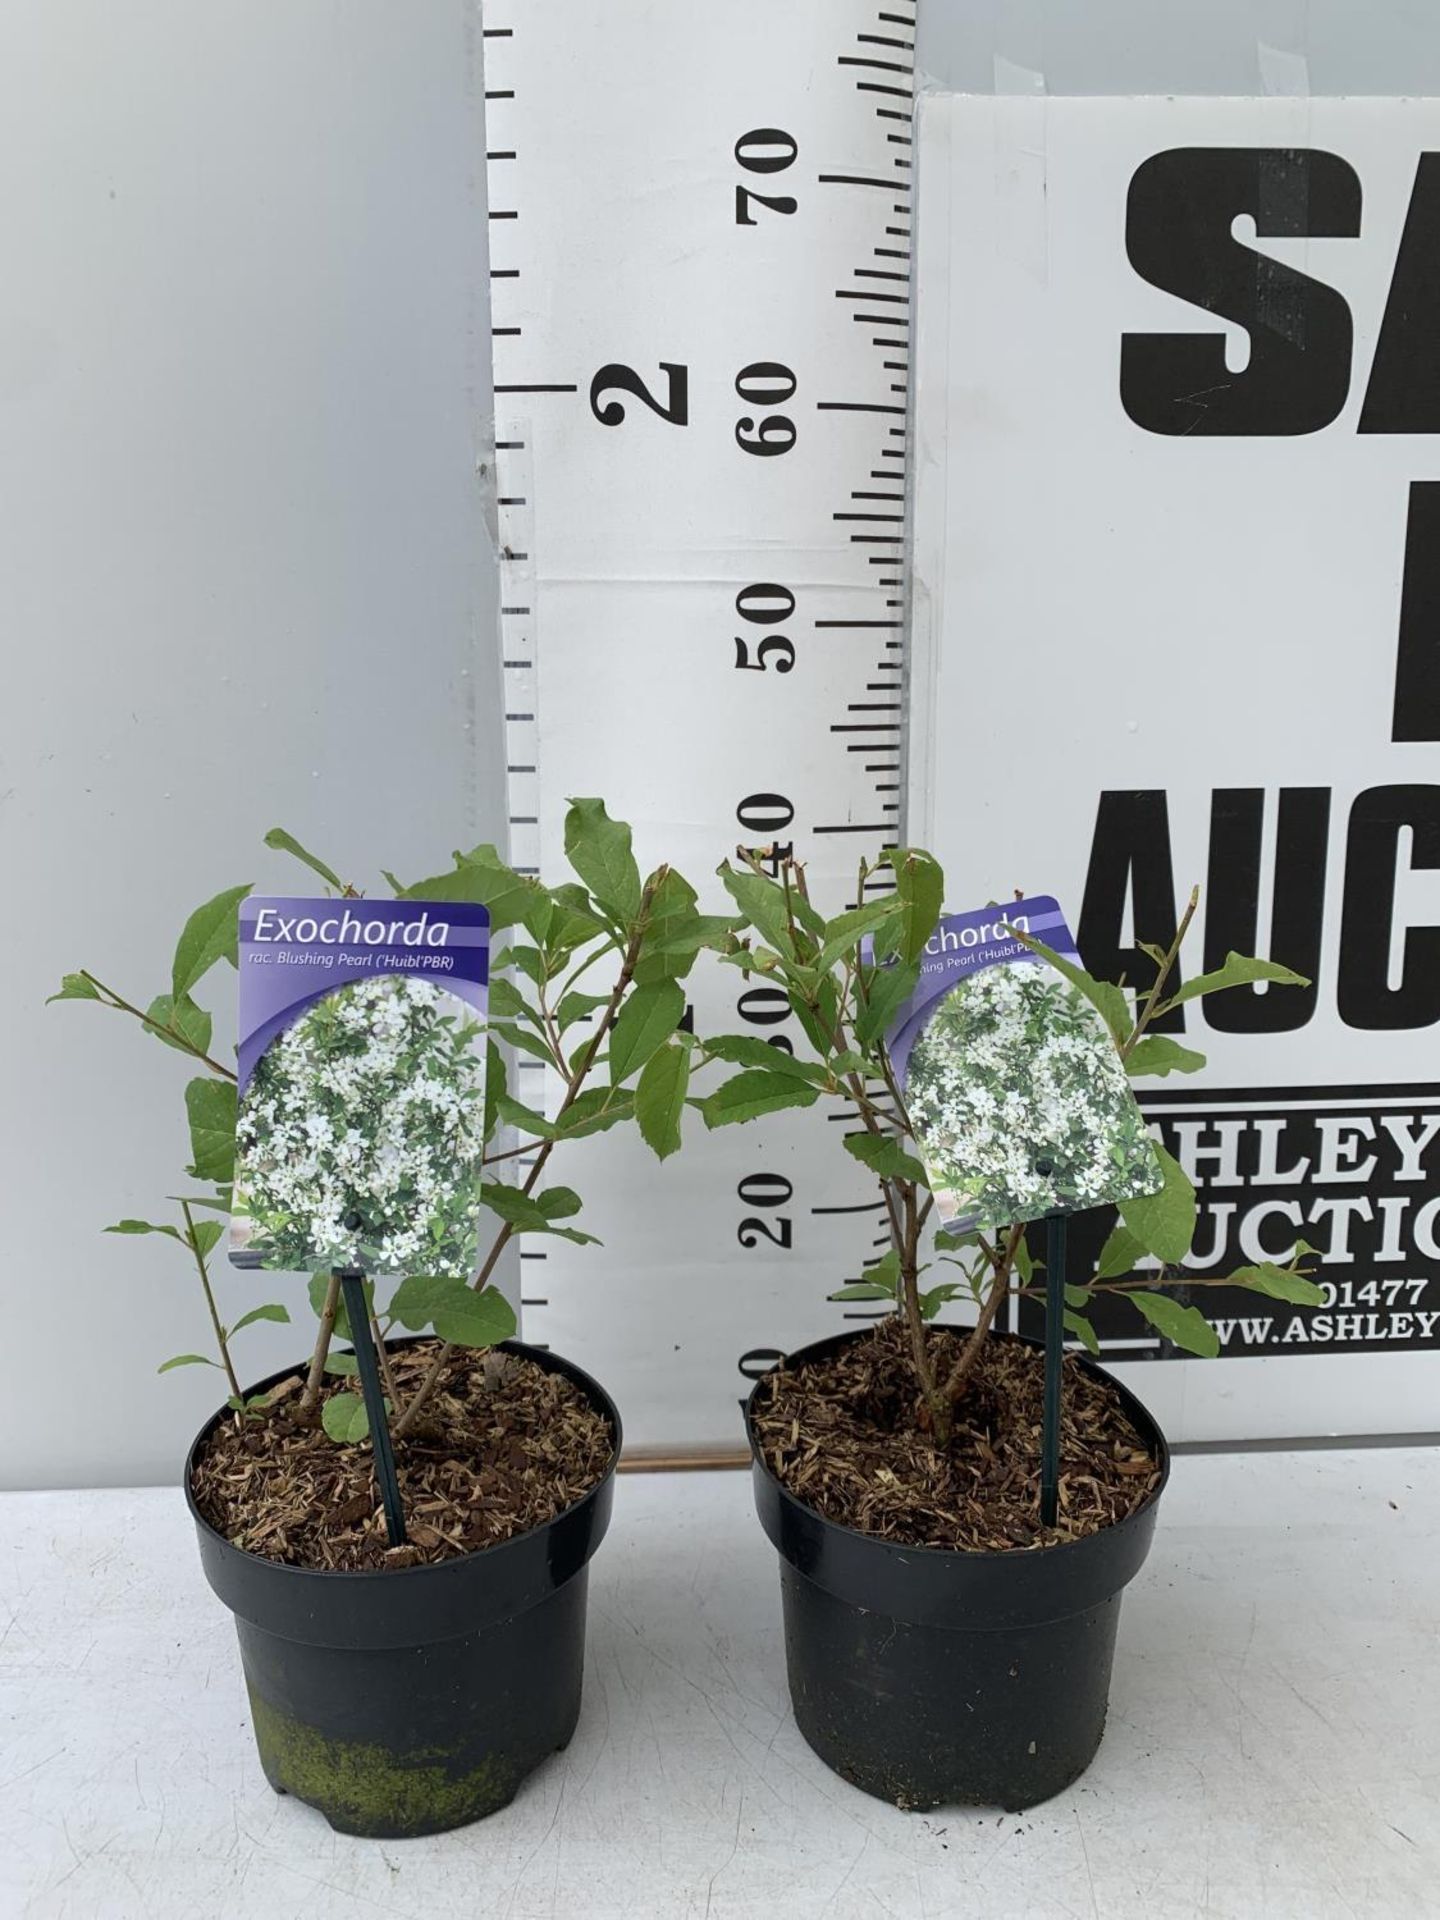 TWO EXOCHORDA BLUSHING PEARL IN 2 LTR POTS 40CM TALL PLUS VAT TO BE SOLD FOR THE TWO - Bild 2 aus 8